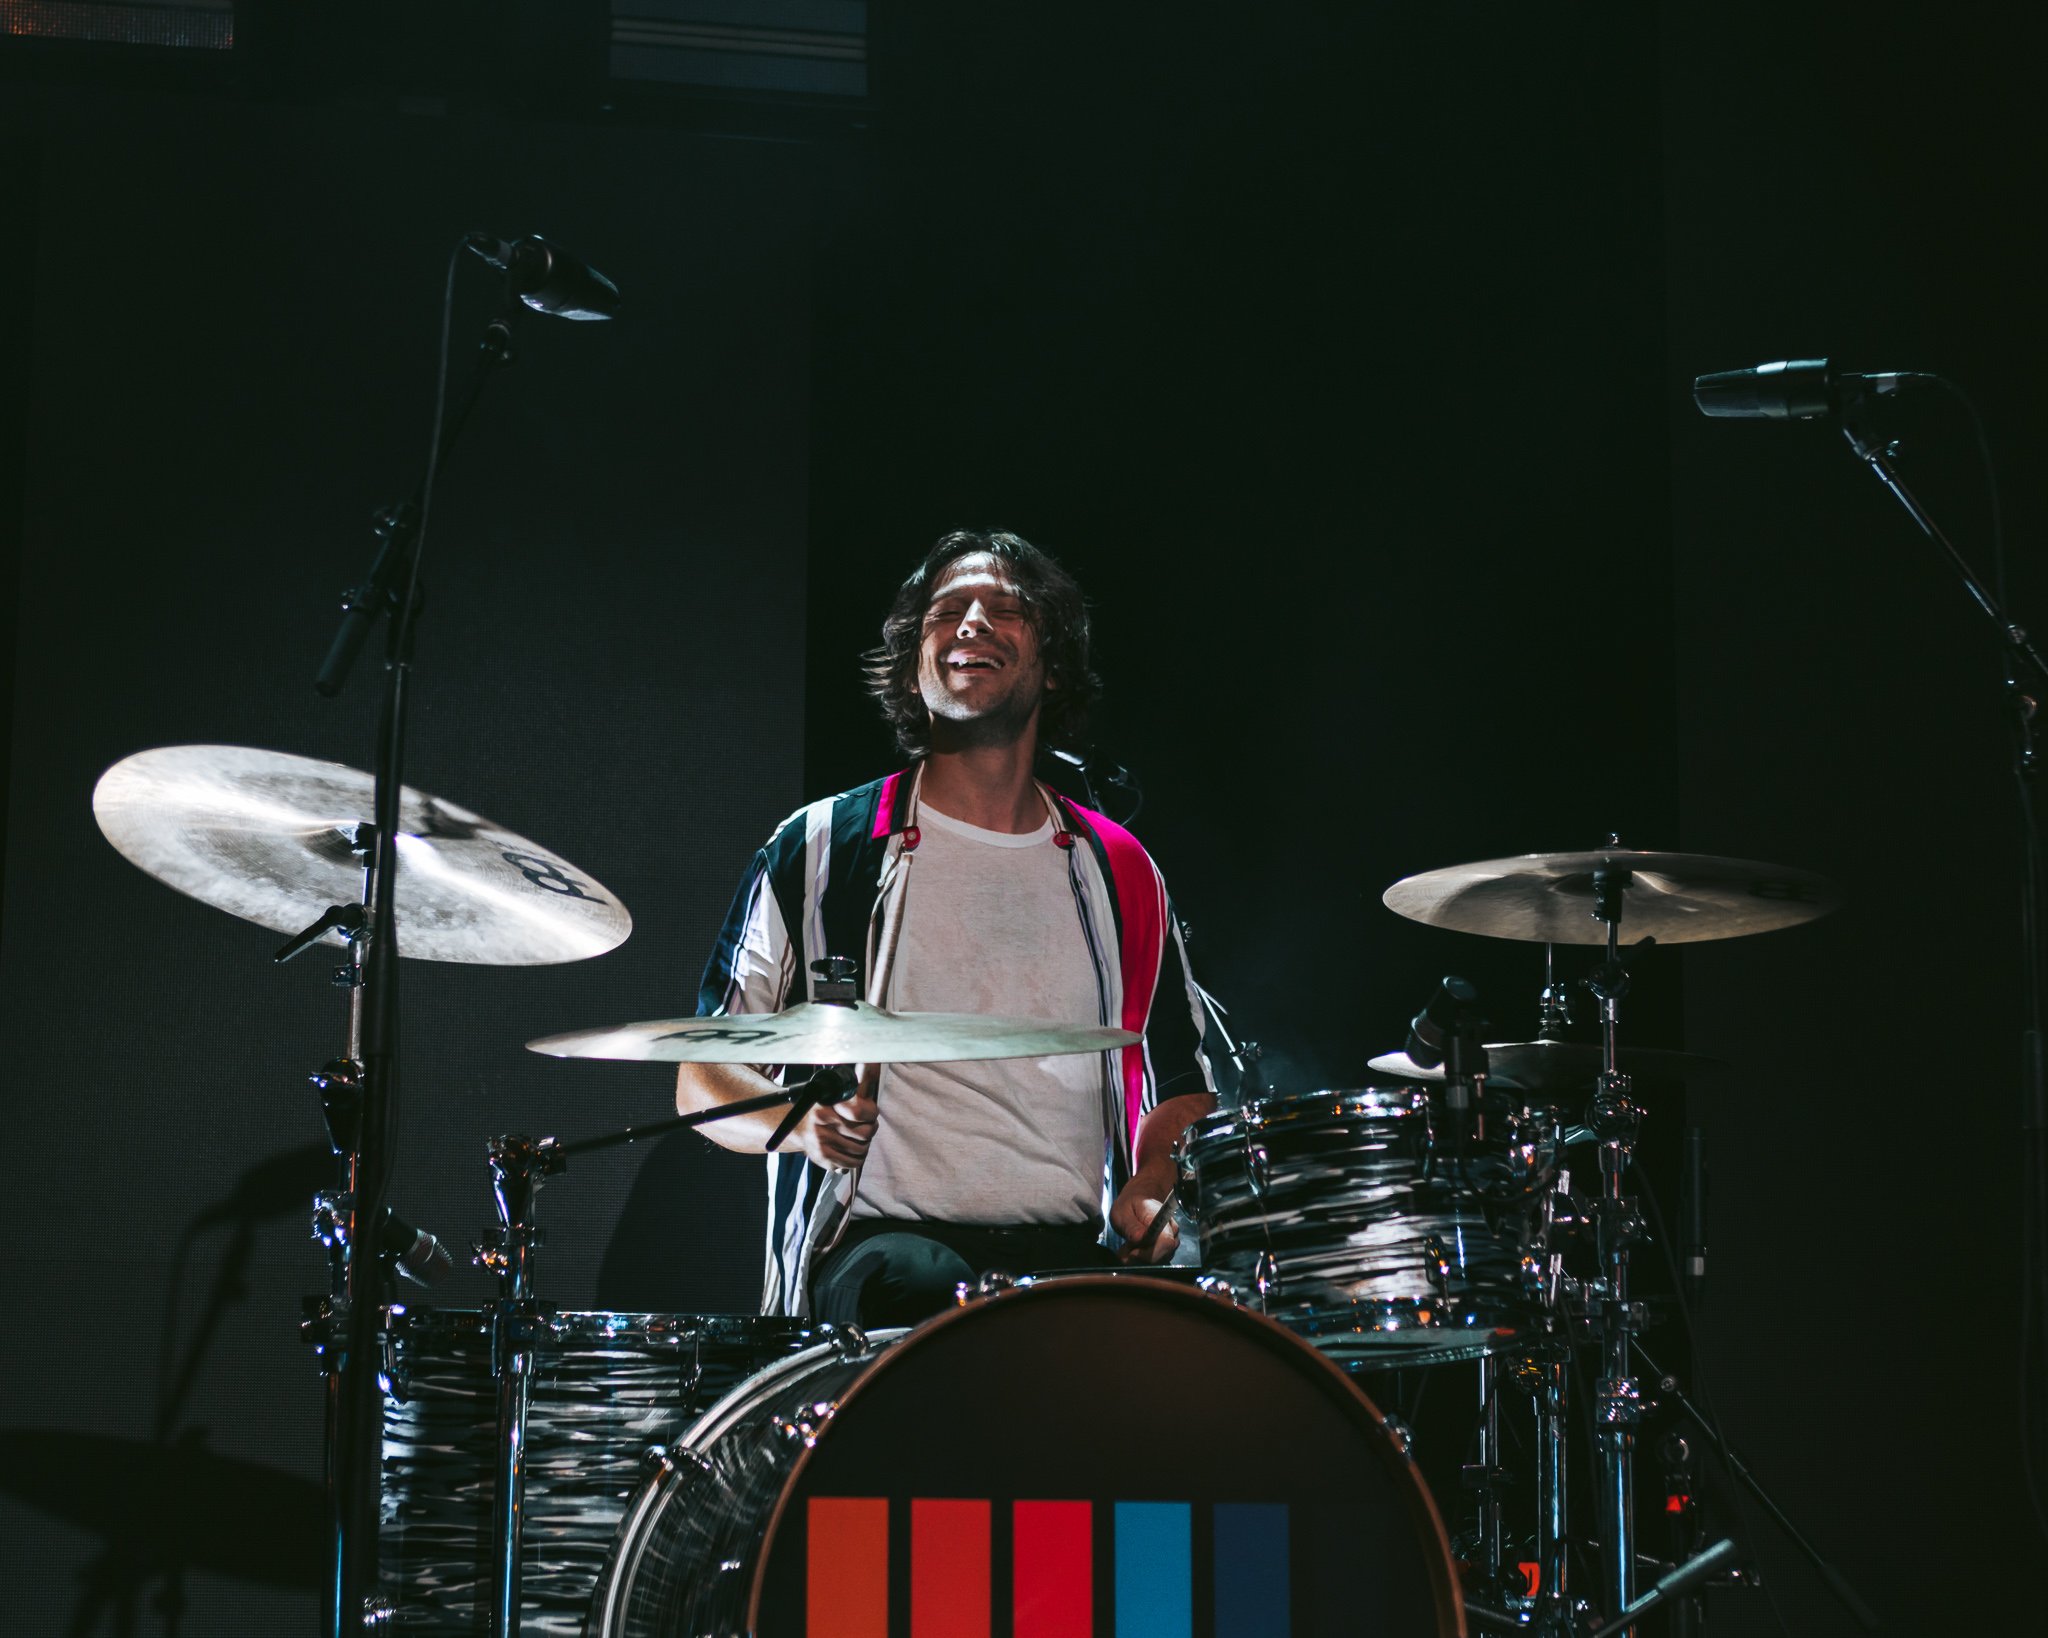  Drummer Ryan Seaman smiles out at the crowd. 